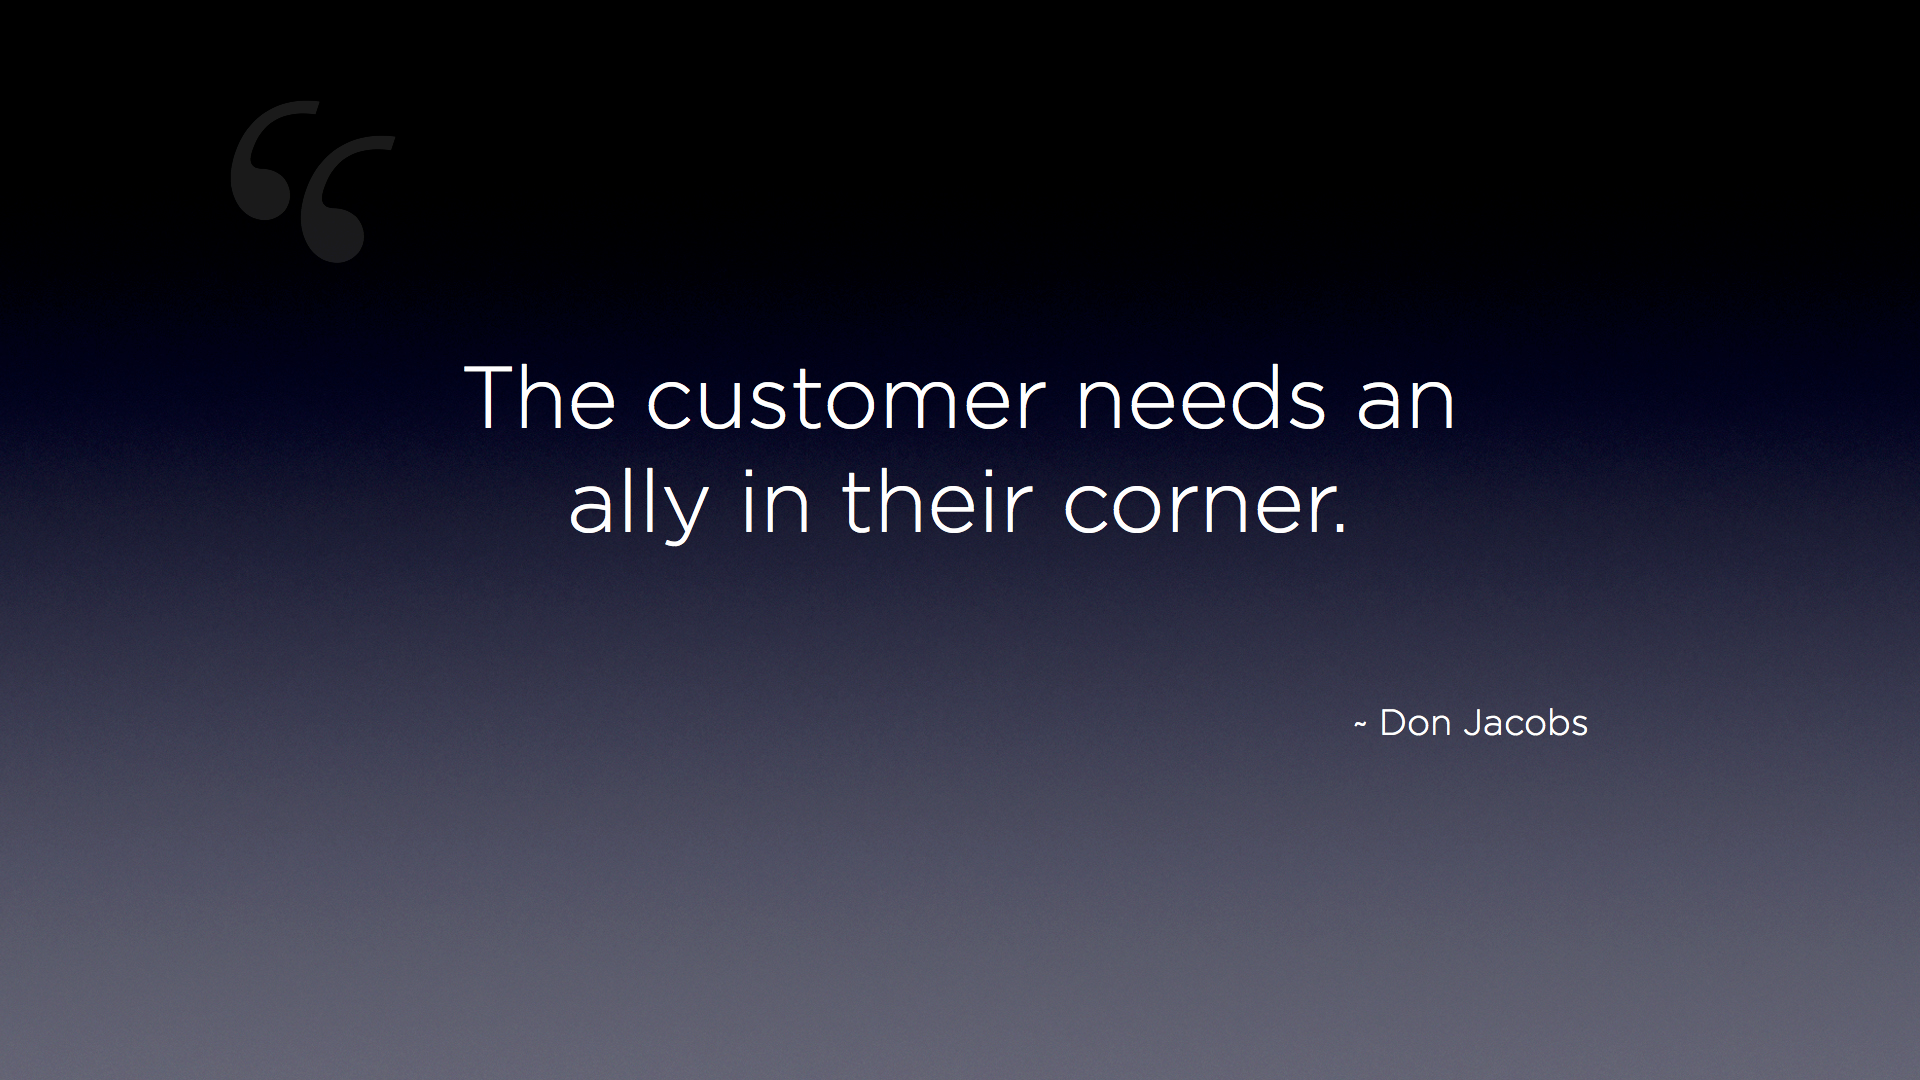 "The customer needs an ally in their corner." - Don Jacobs